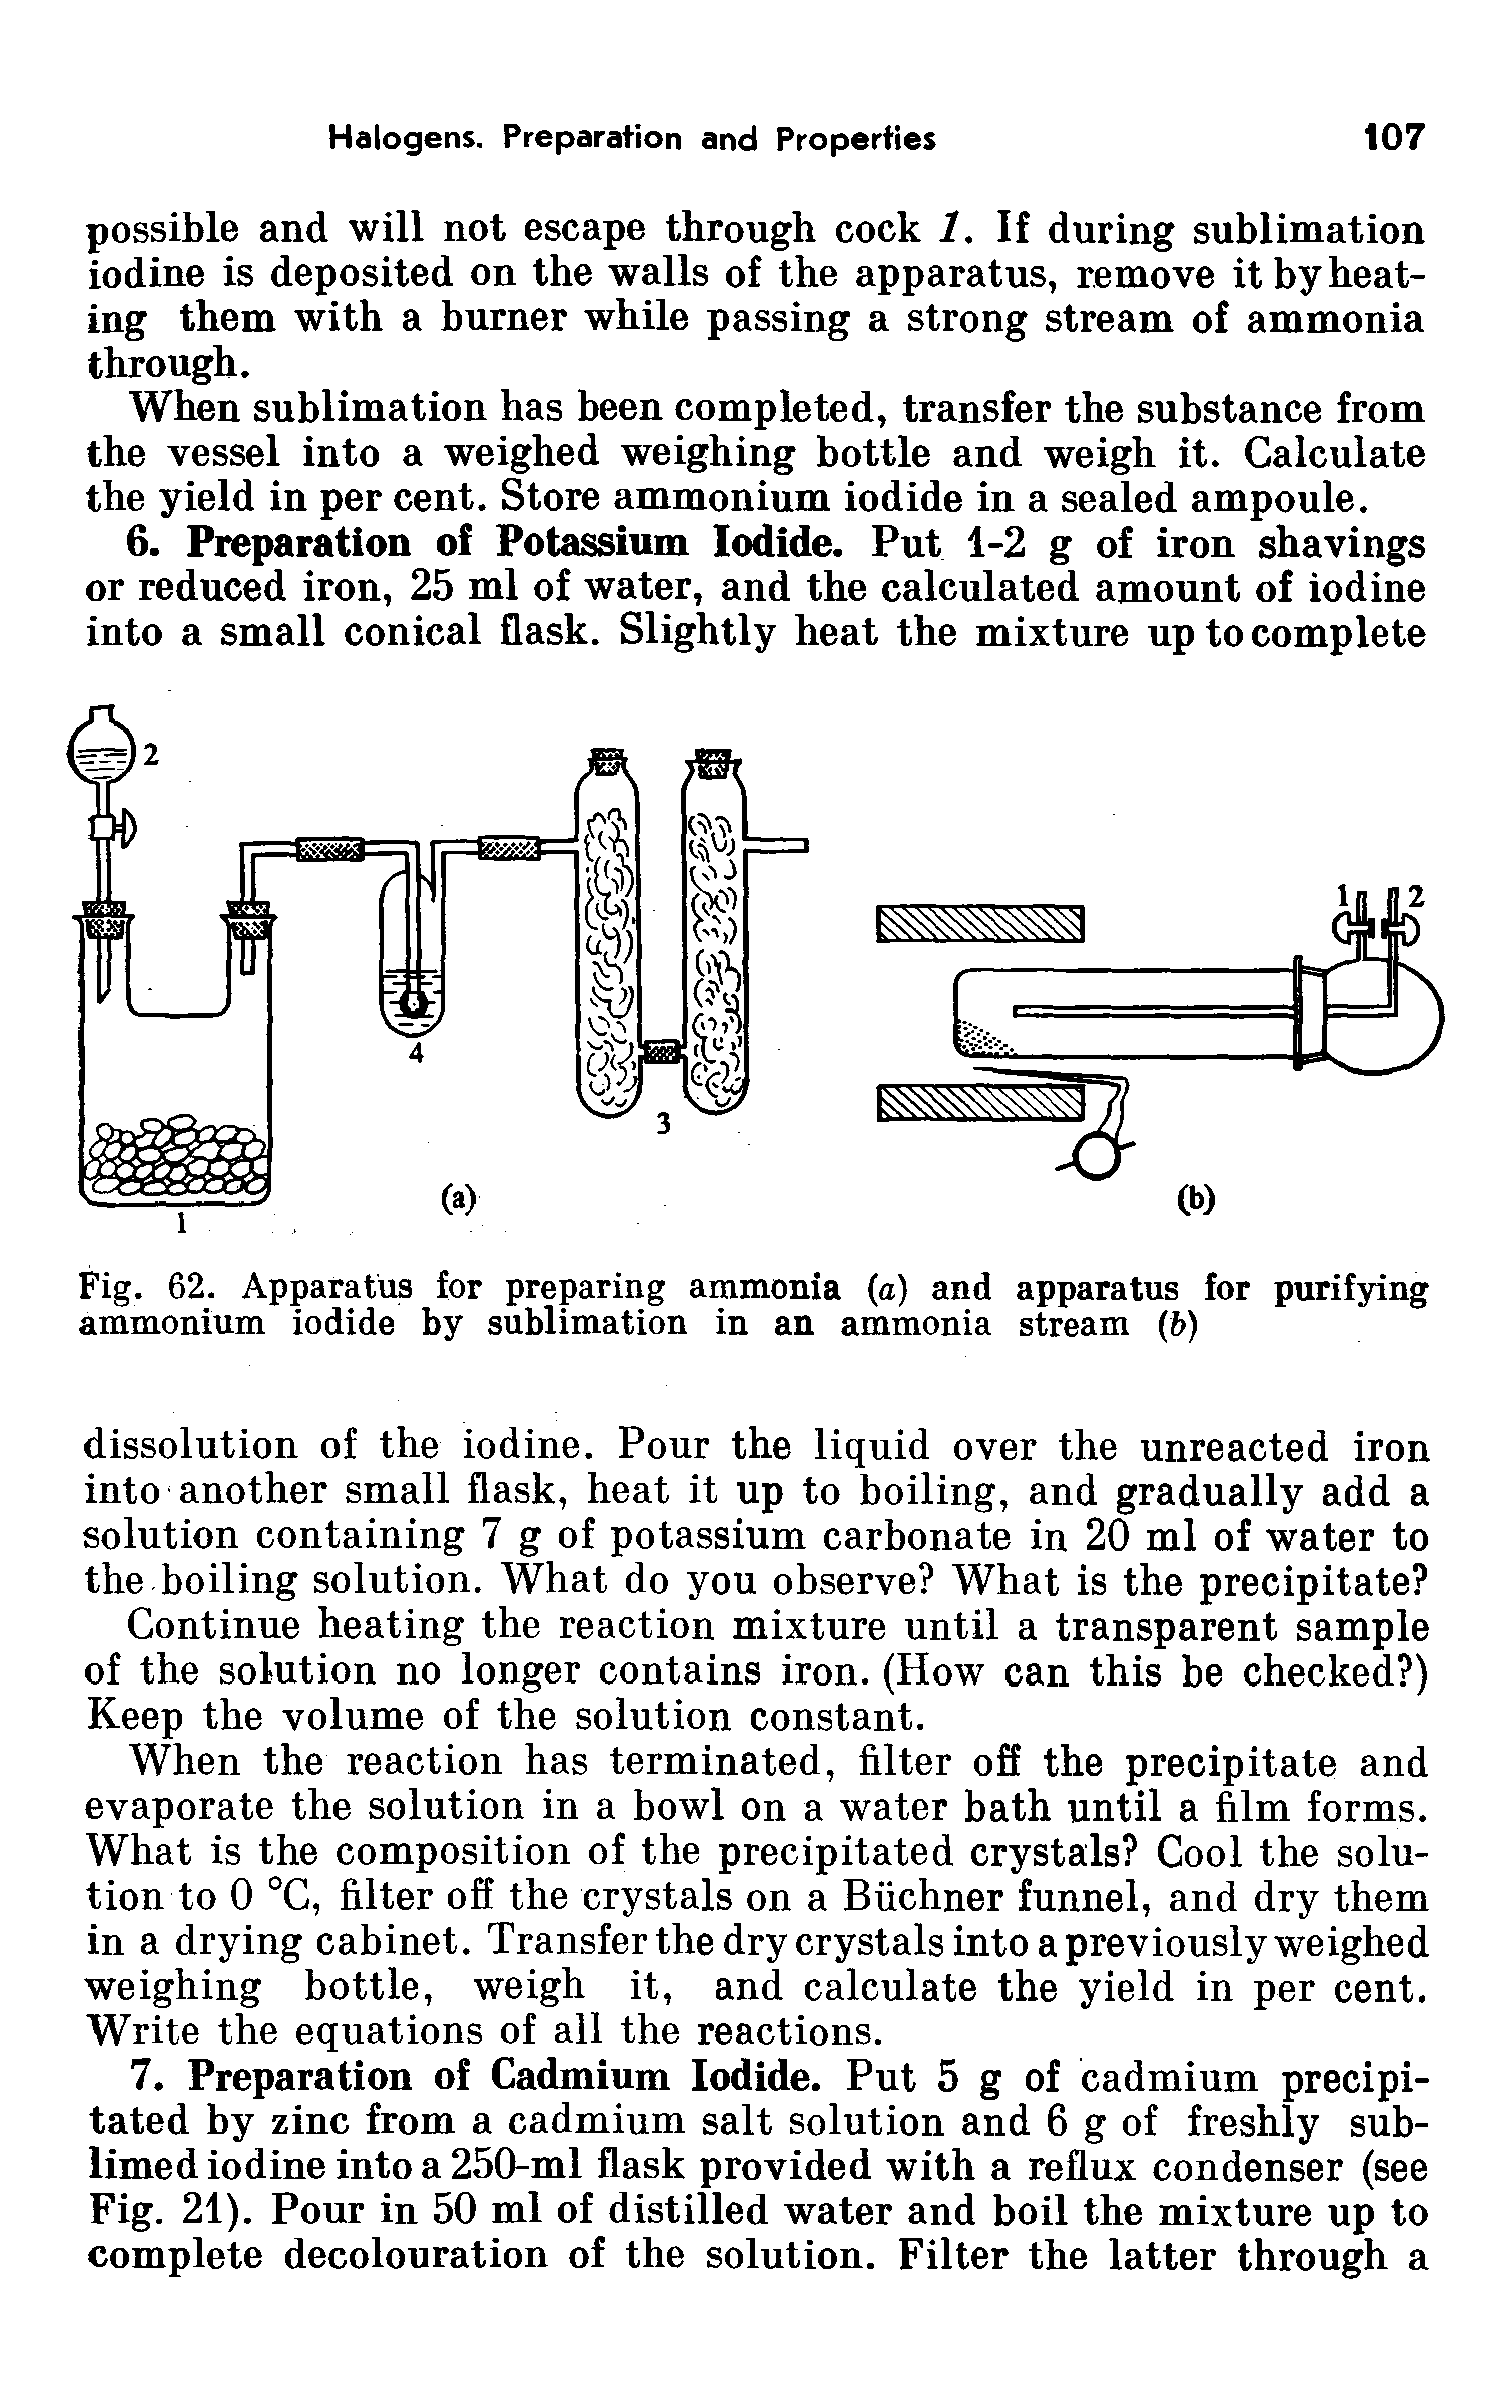 Fig. 62. Apparatus for preparing ammonia (a) and apparatus for purifying ammonium iodide by sublimation in an ammonia stream (6)...